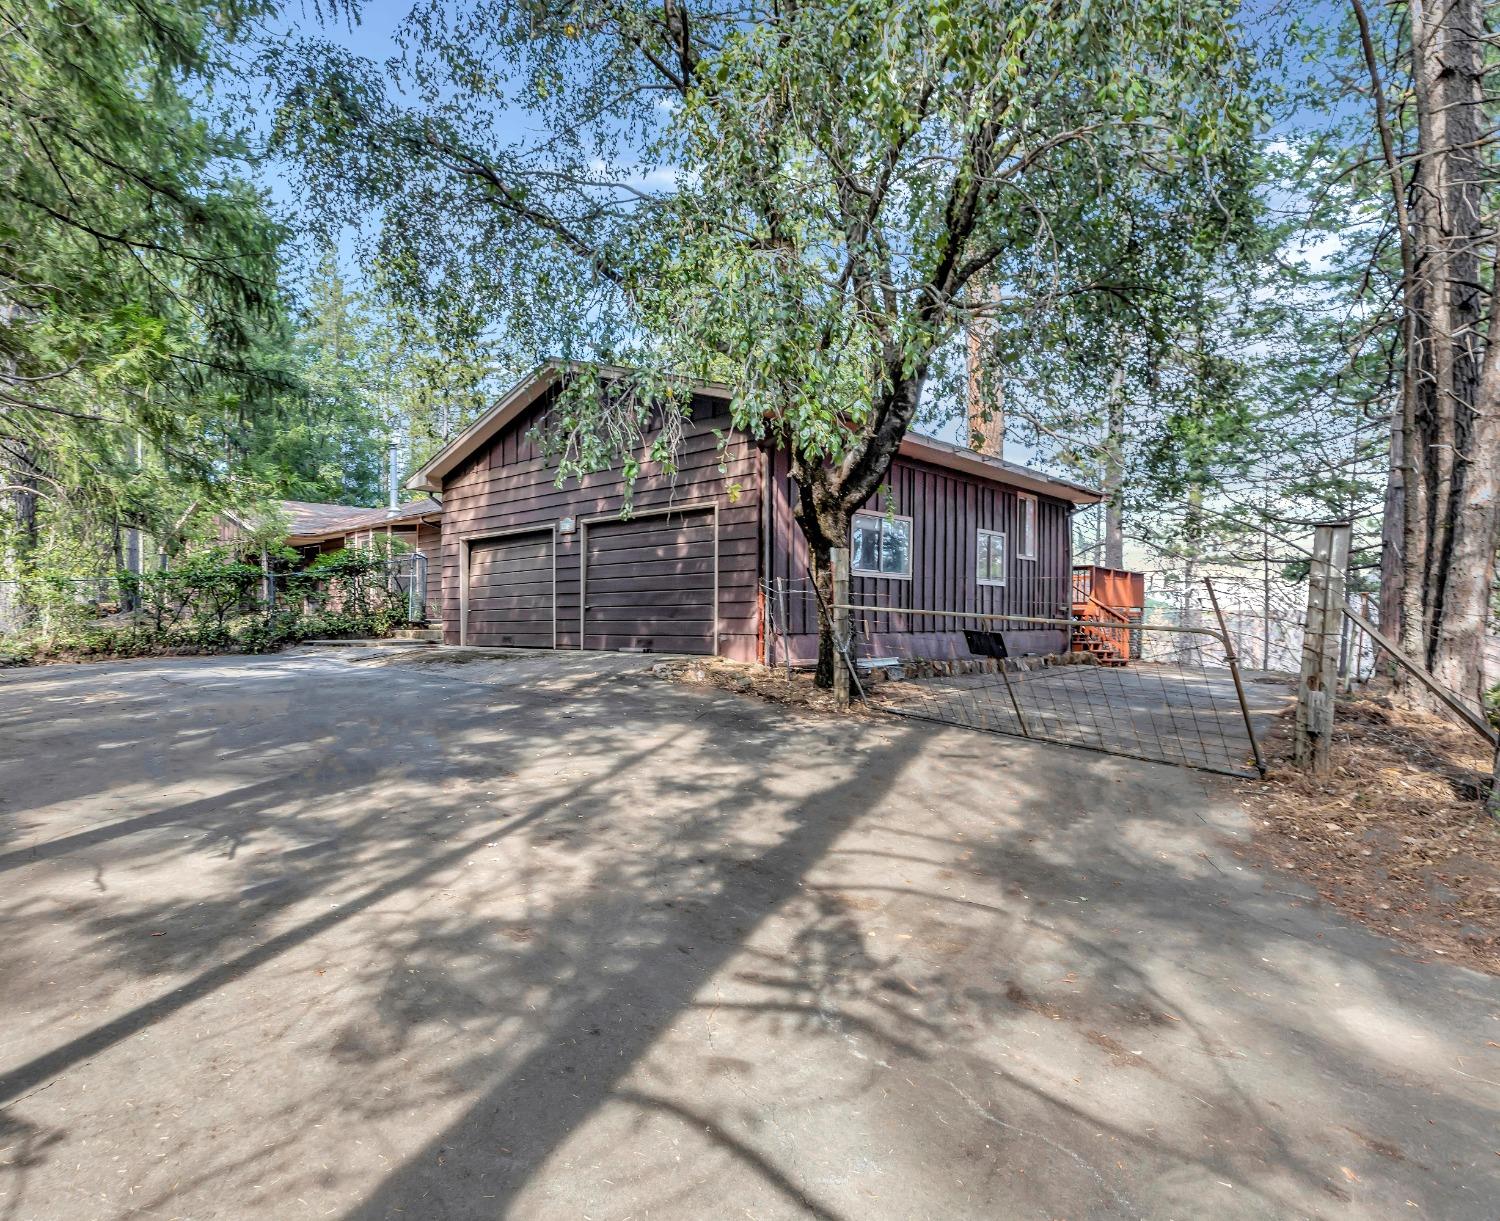 Photo of 5925 Sly Park Rd in Placerville, CA